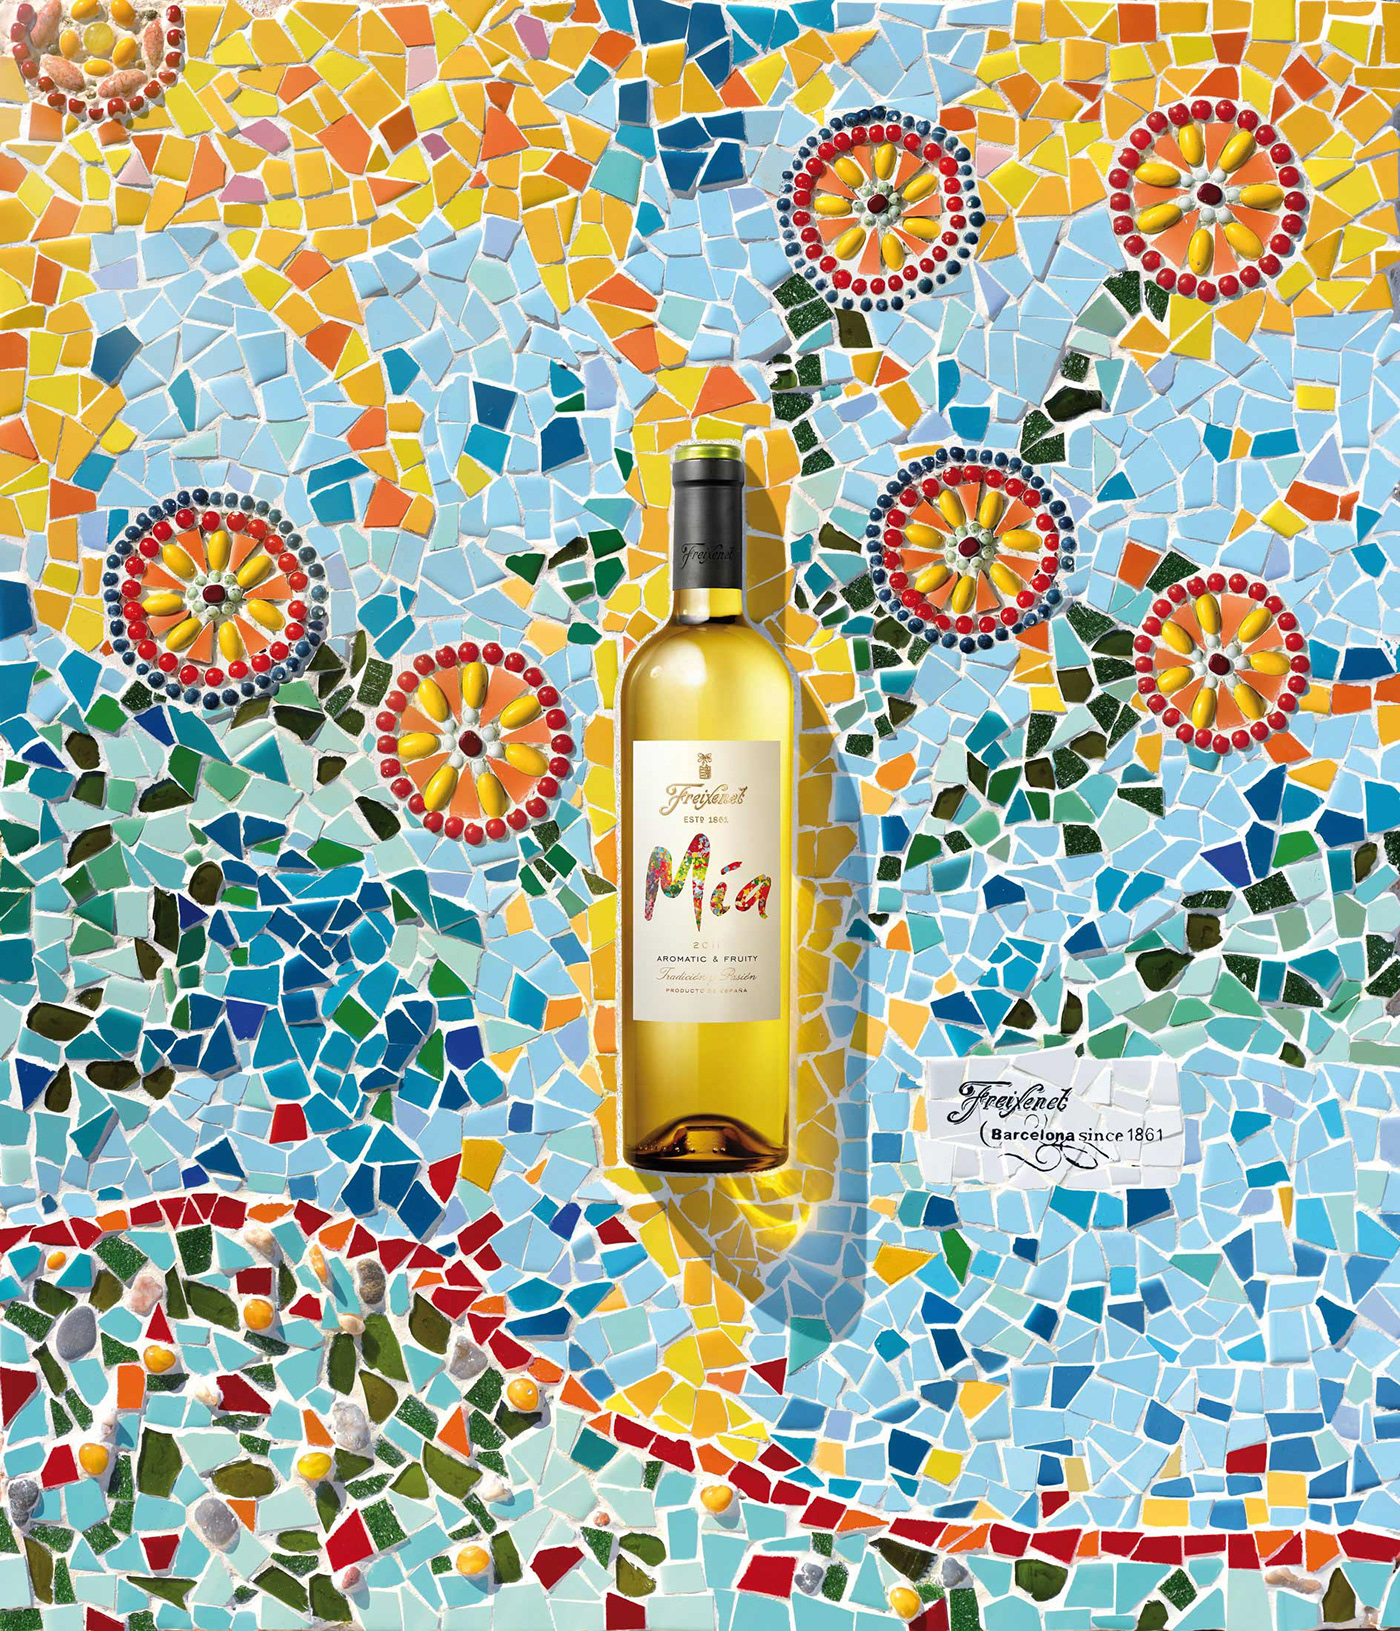 ads Advertising  campaign Gaudi mosaic Photography  postproduction Product Photography retouch wine